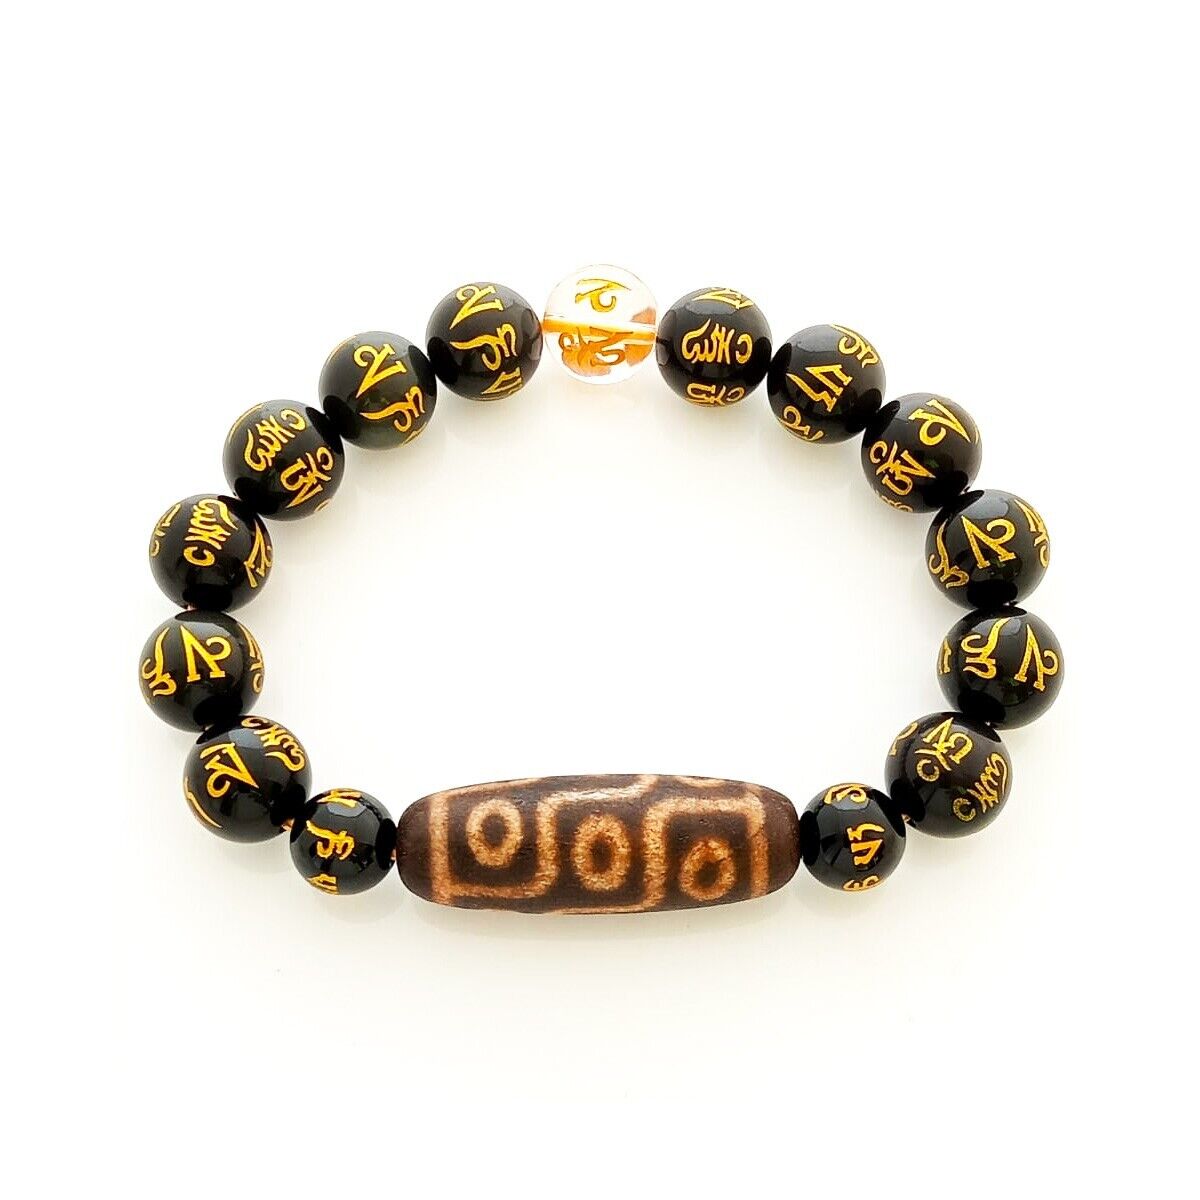 The Authentic Tibetan OLD Agate 9 Eyed dZi Bead Bracelet for Wealth and Success